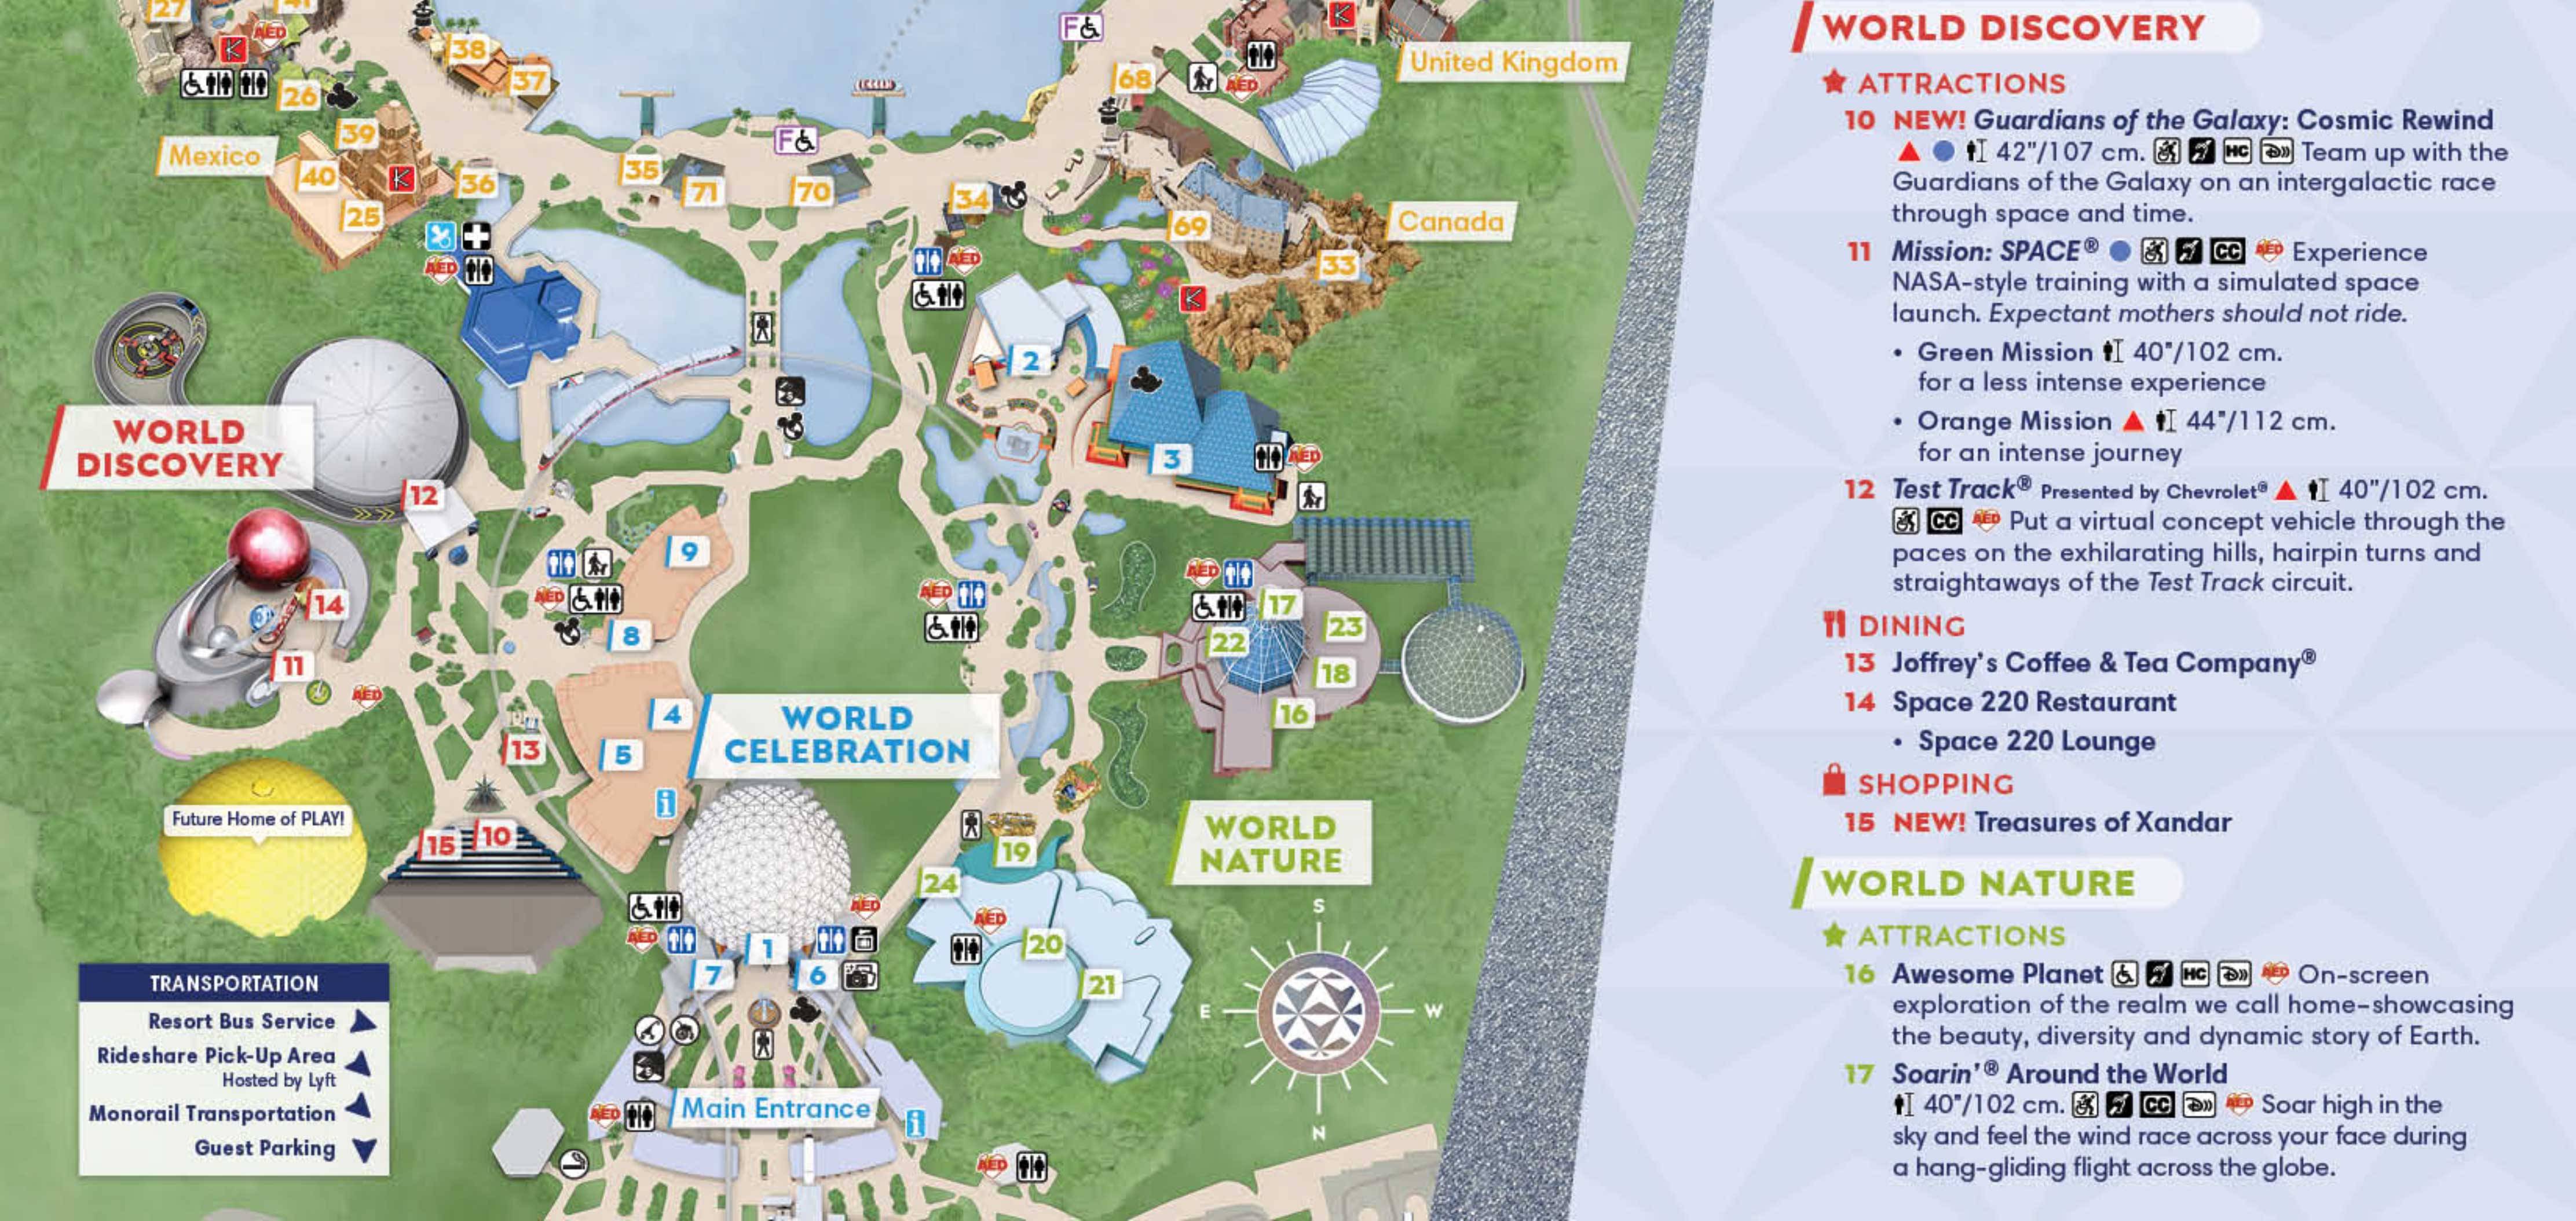 EPCOT guide map - May 2022